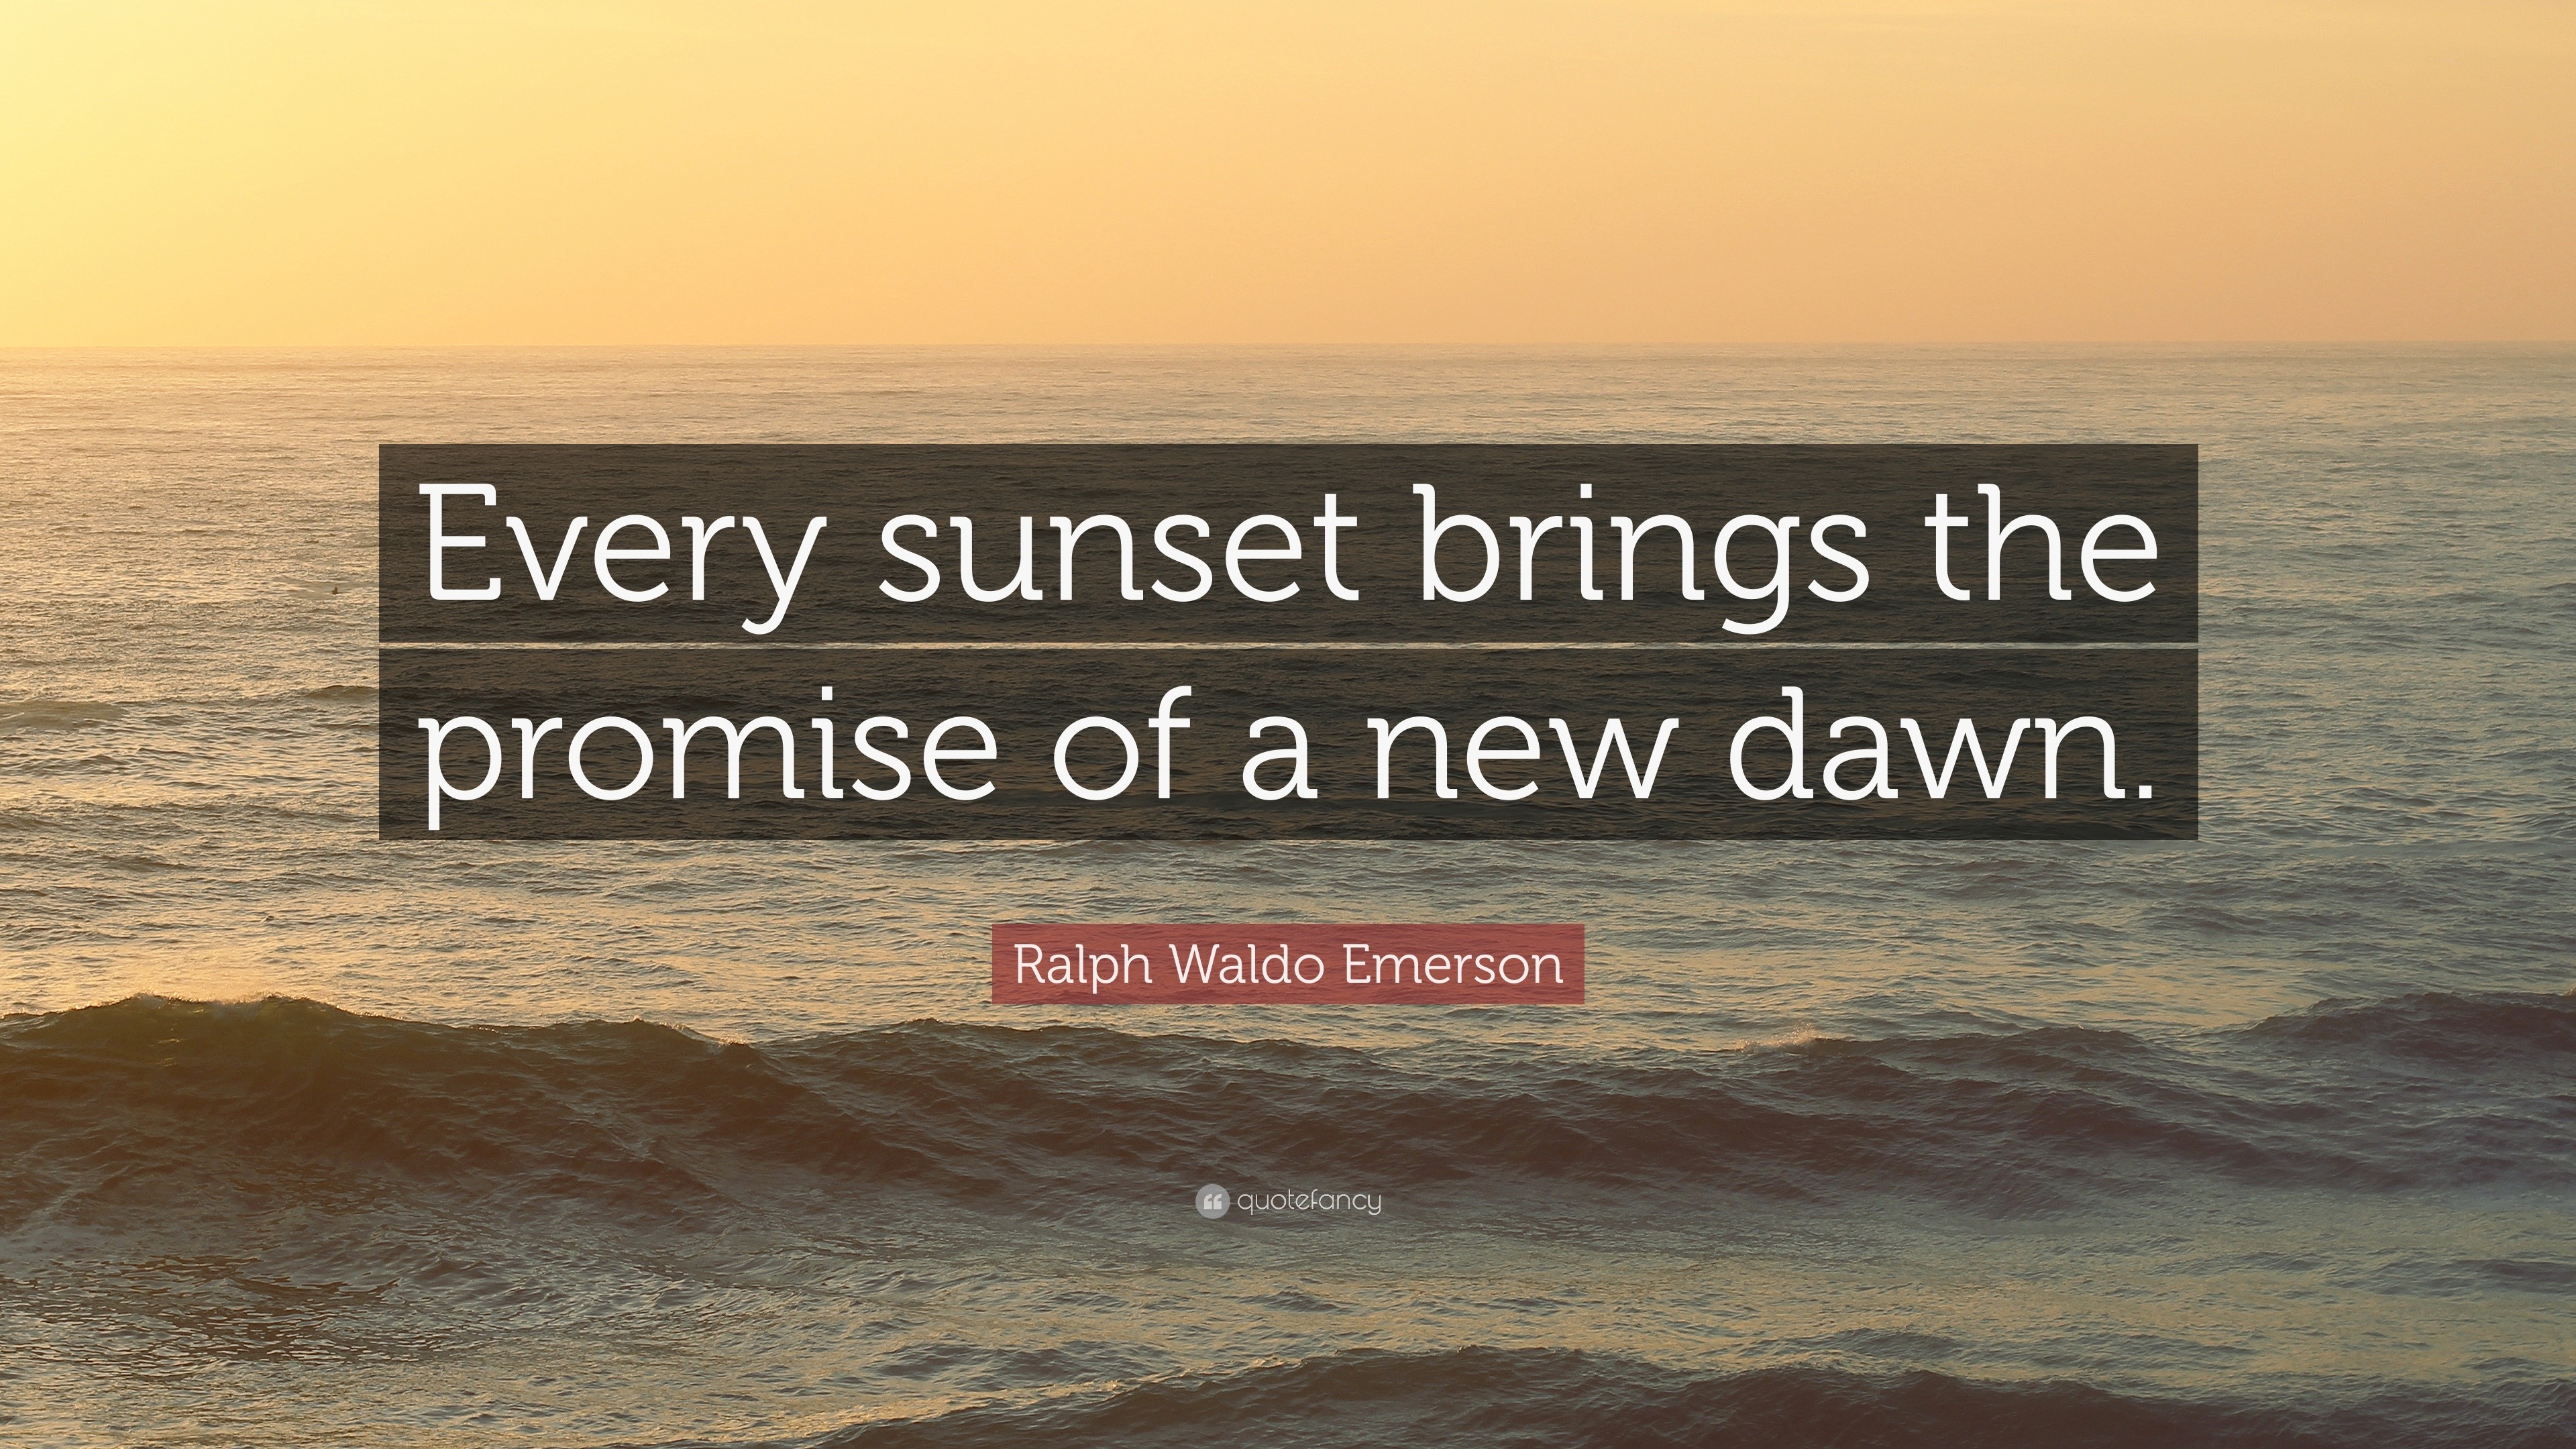 Ralph Waldo Emerson Quote Every Sunset Brings The Promise Of A